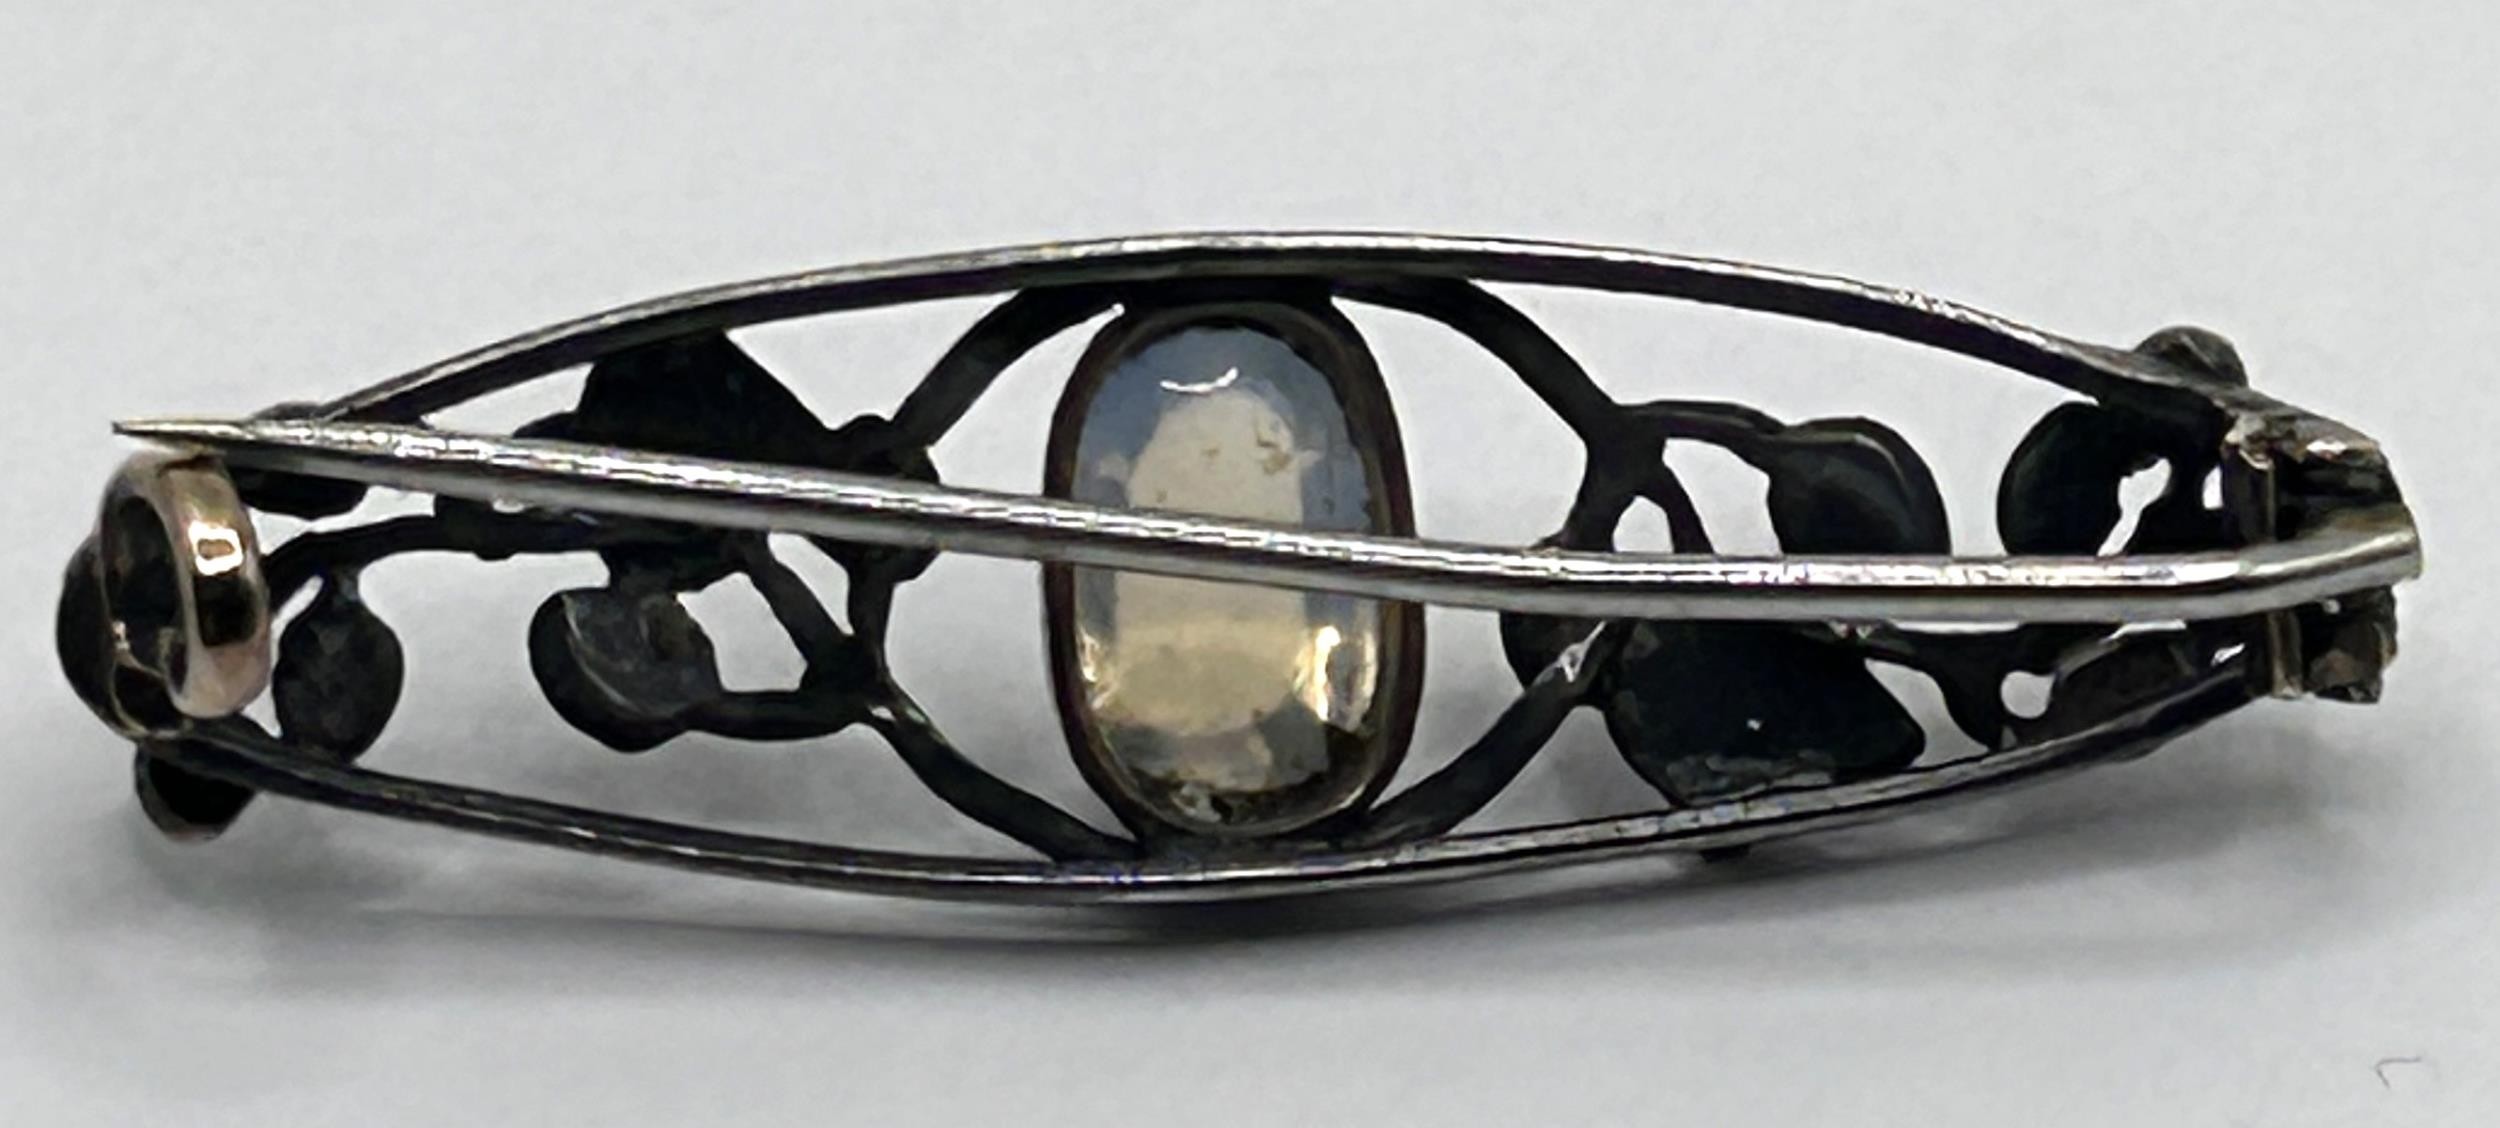 Attributed to Liberty, a pewter, moonstone and enamel brooch, believed to be by Jessie M King, - Image 2 of 3